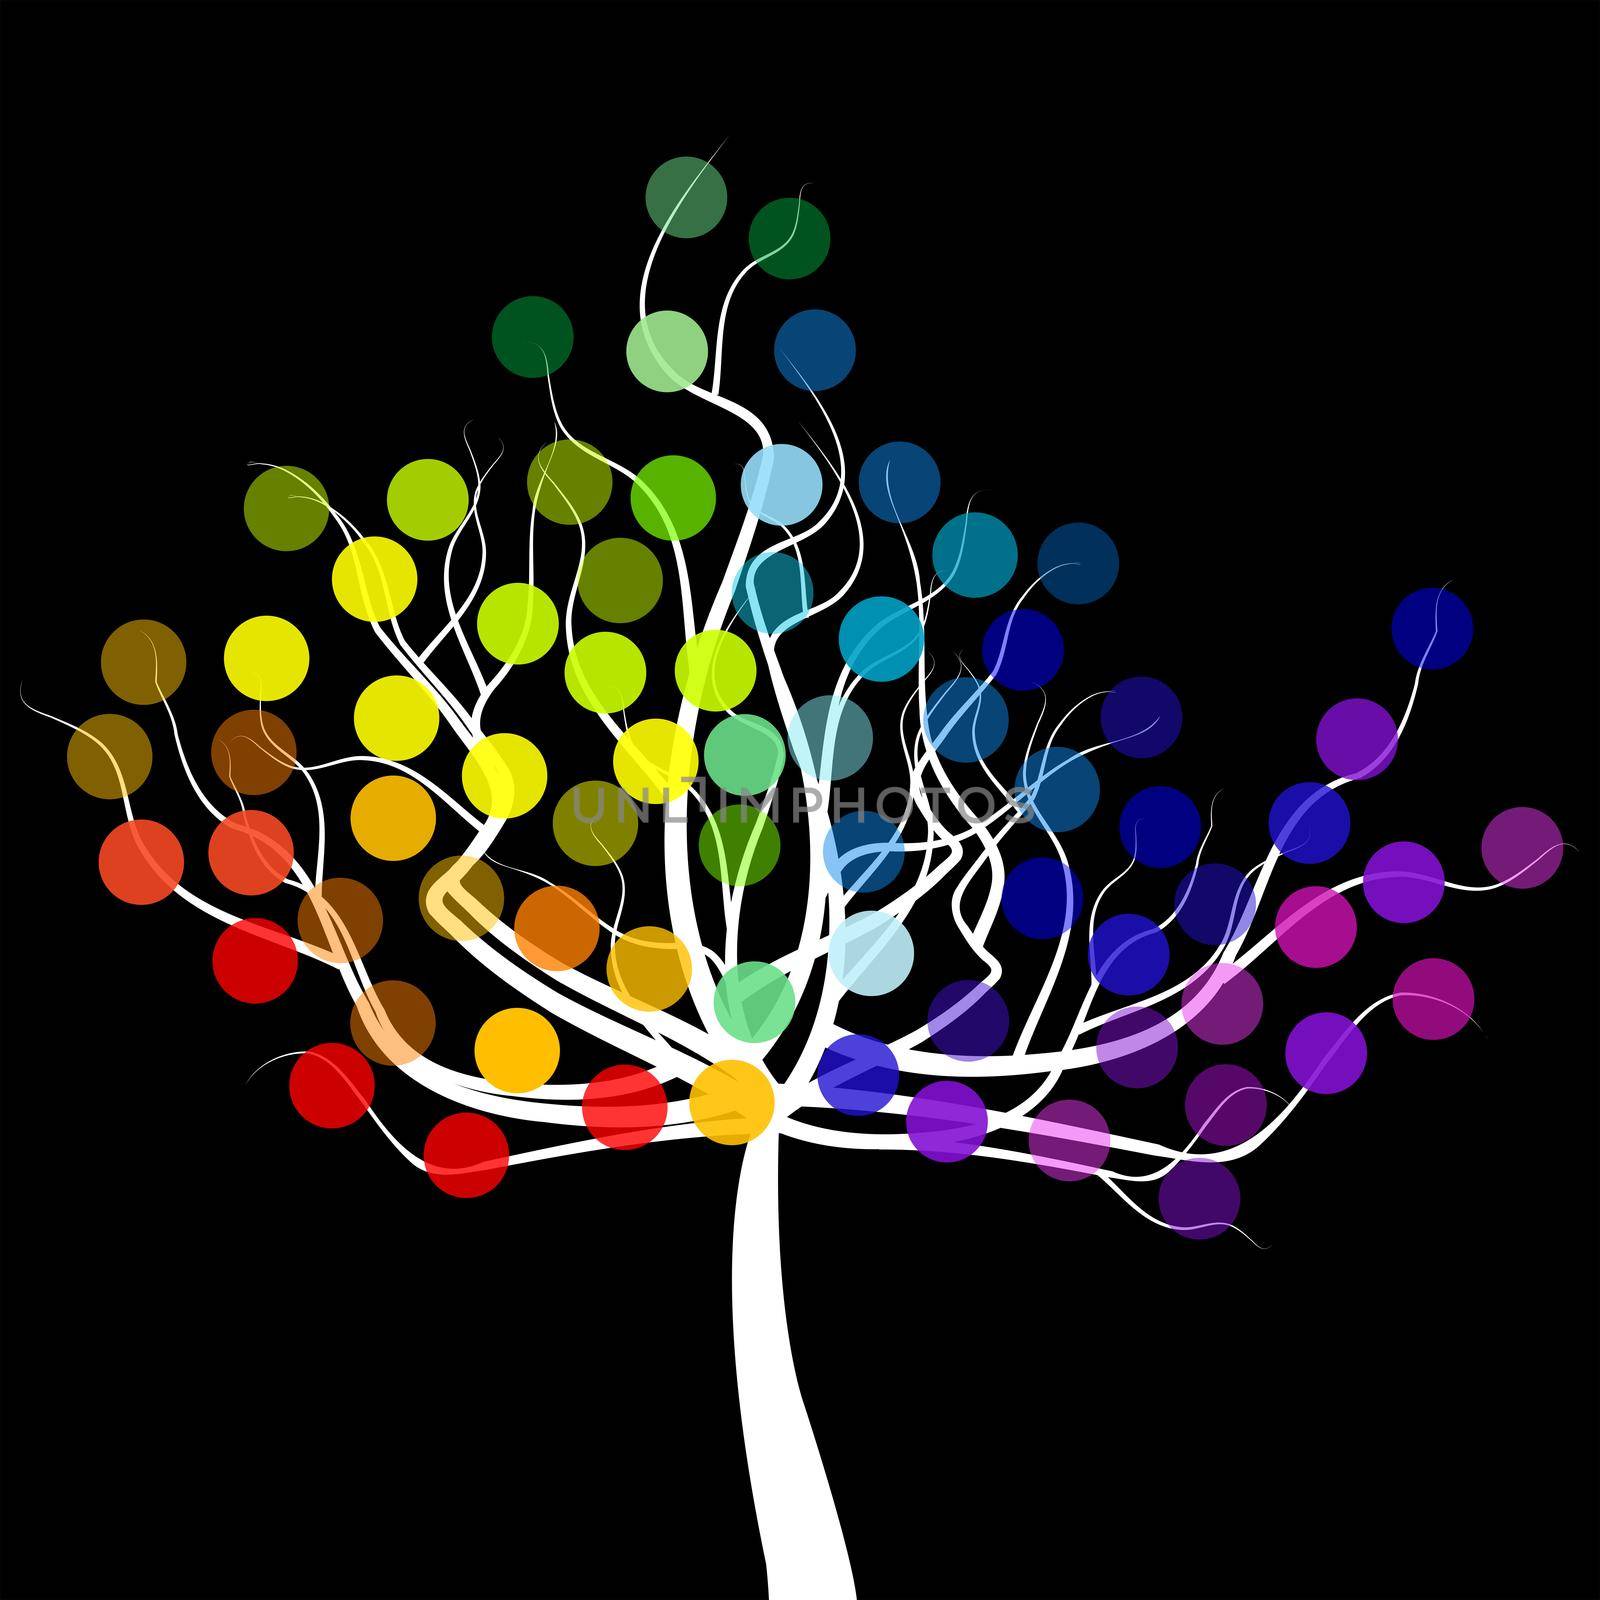 Abstract tree with rainbow colorful round fruits